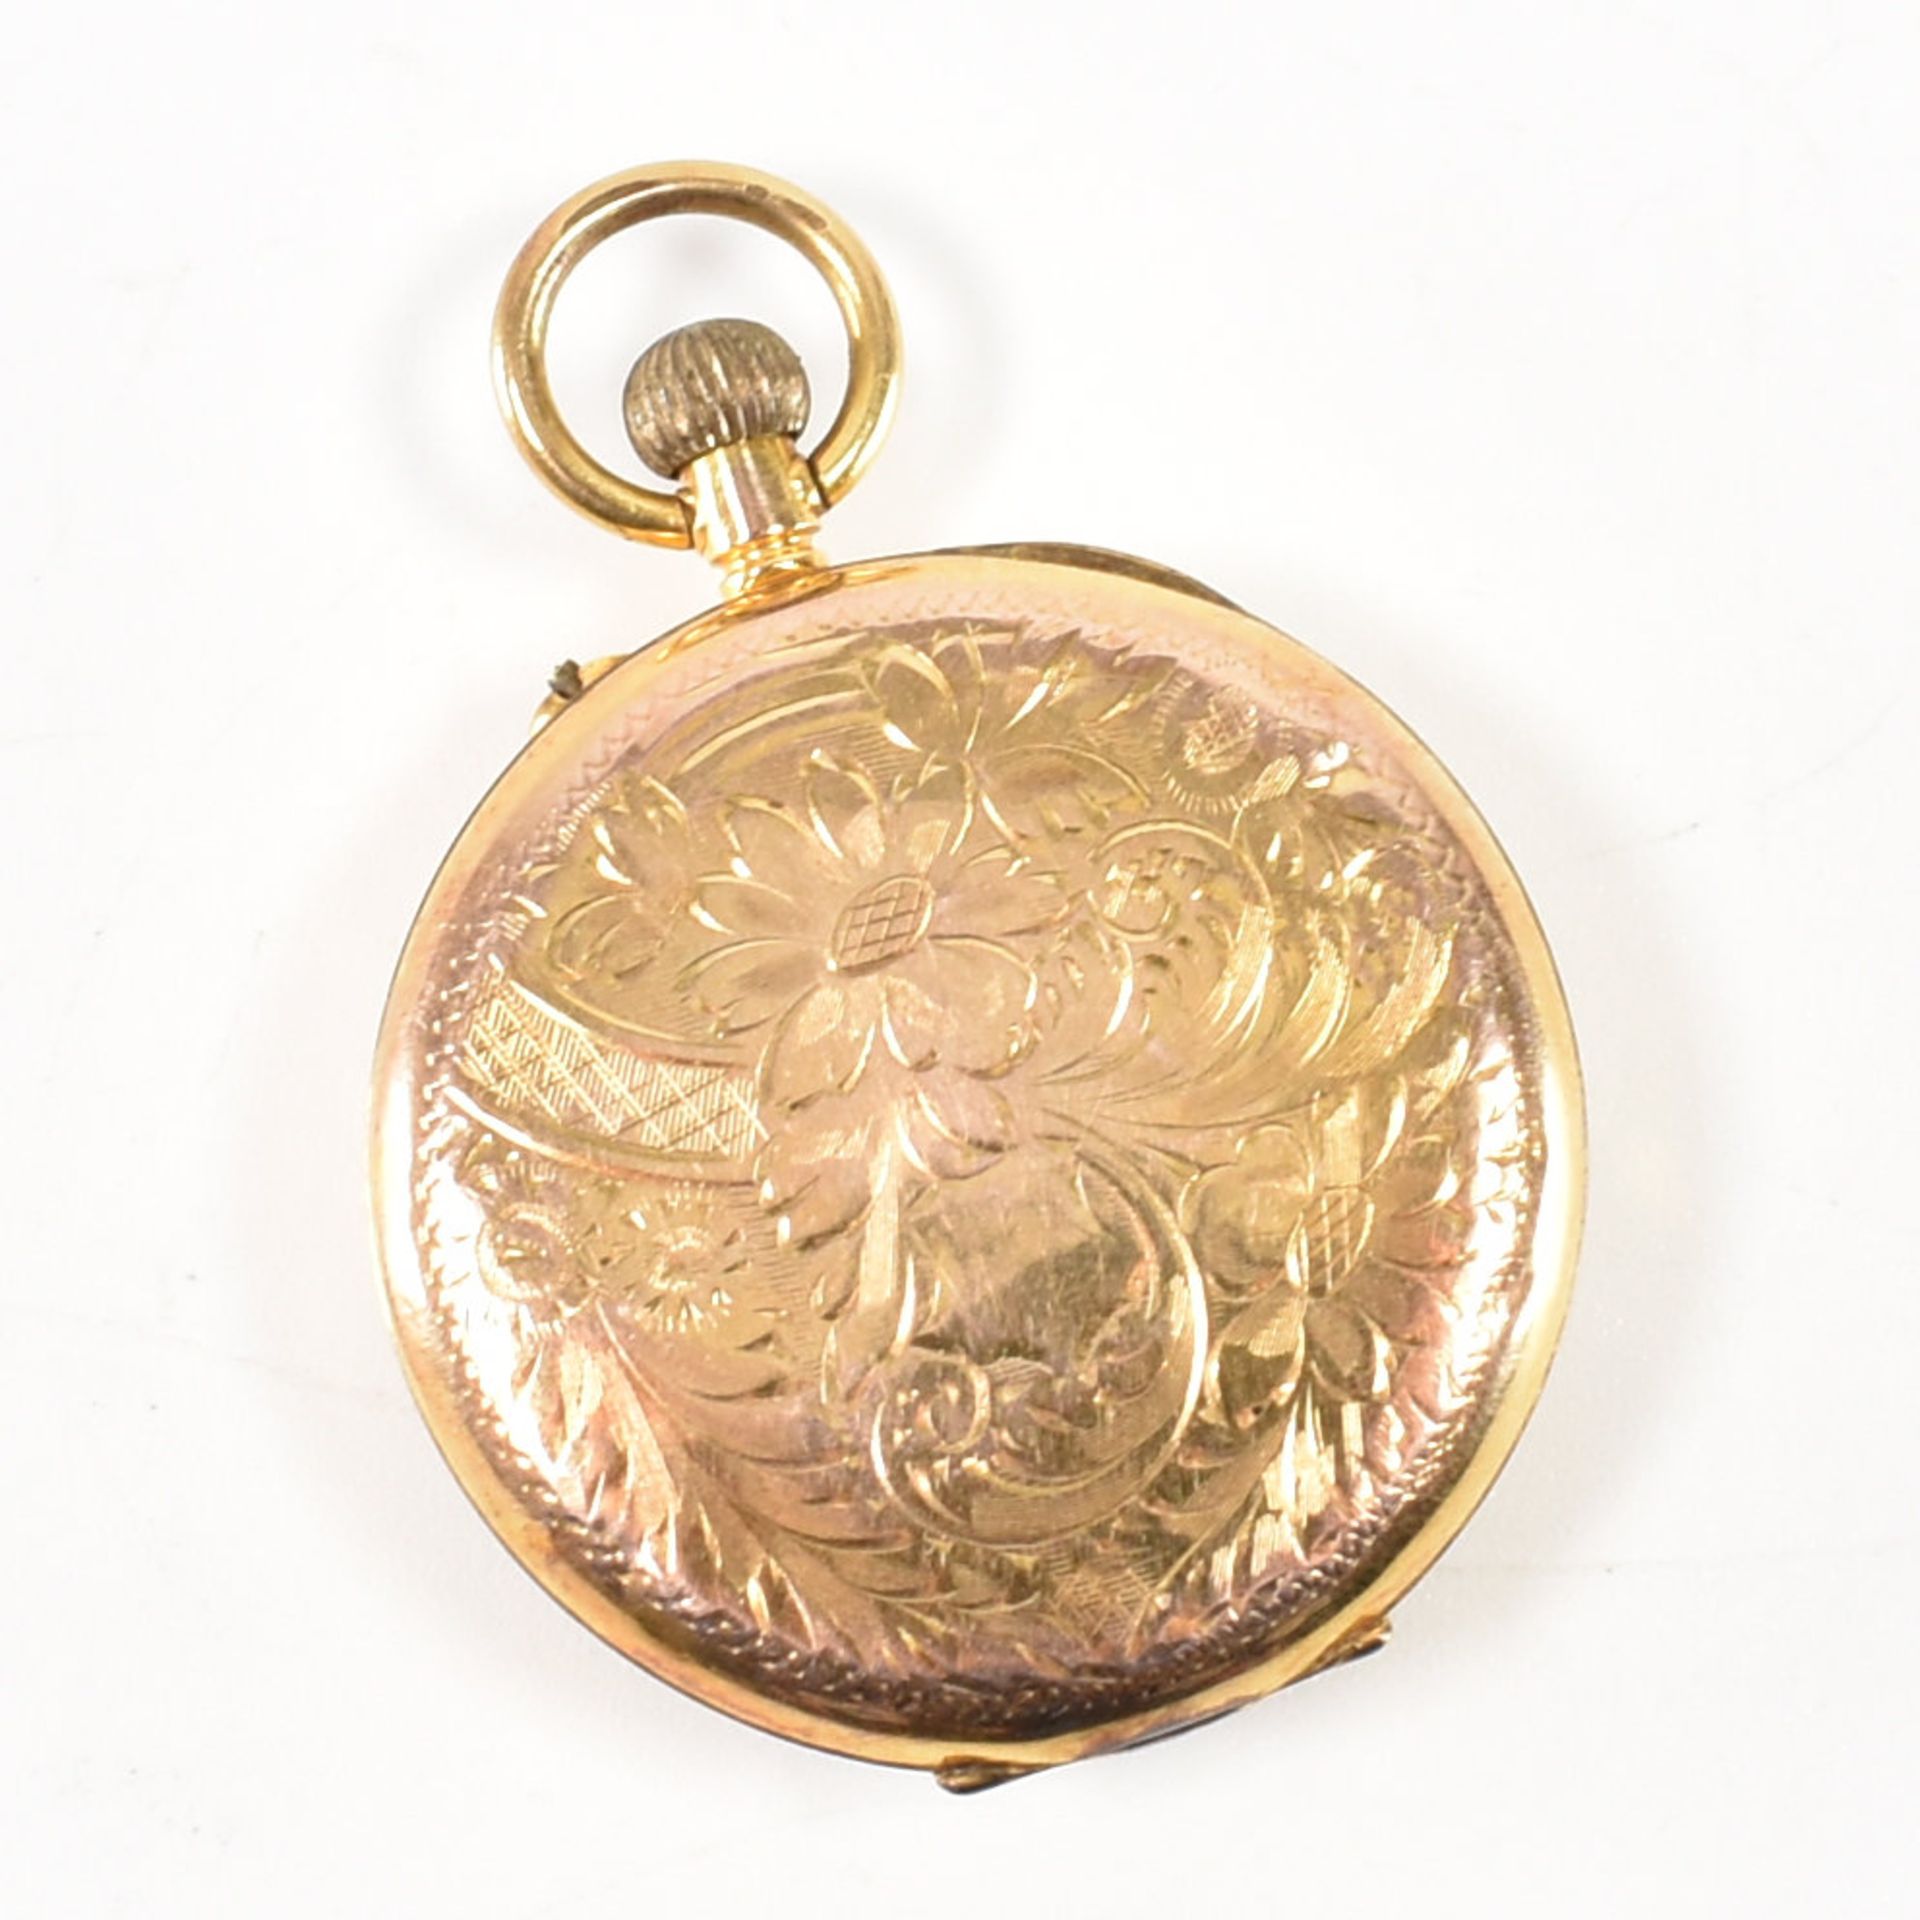 EDWARDIAN HALLMARKED 9CT GOLD FOB WATCH - Image 8 of 8